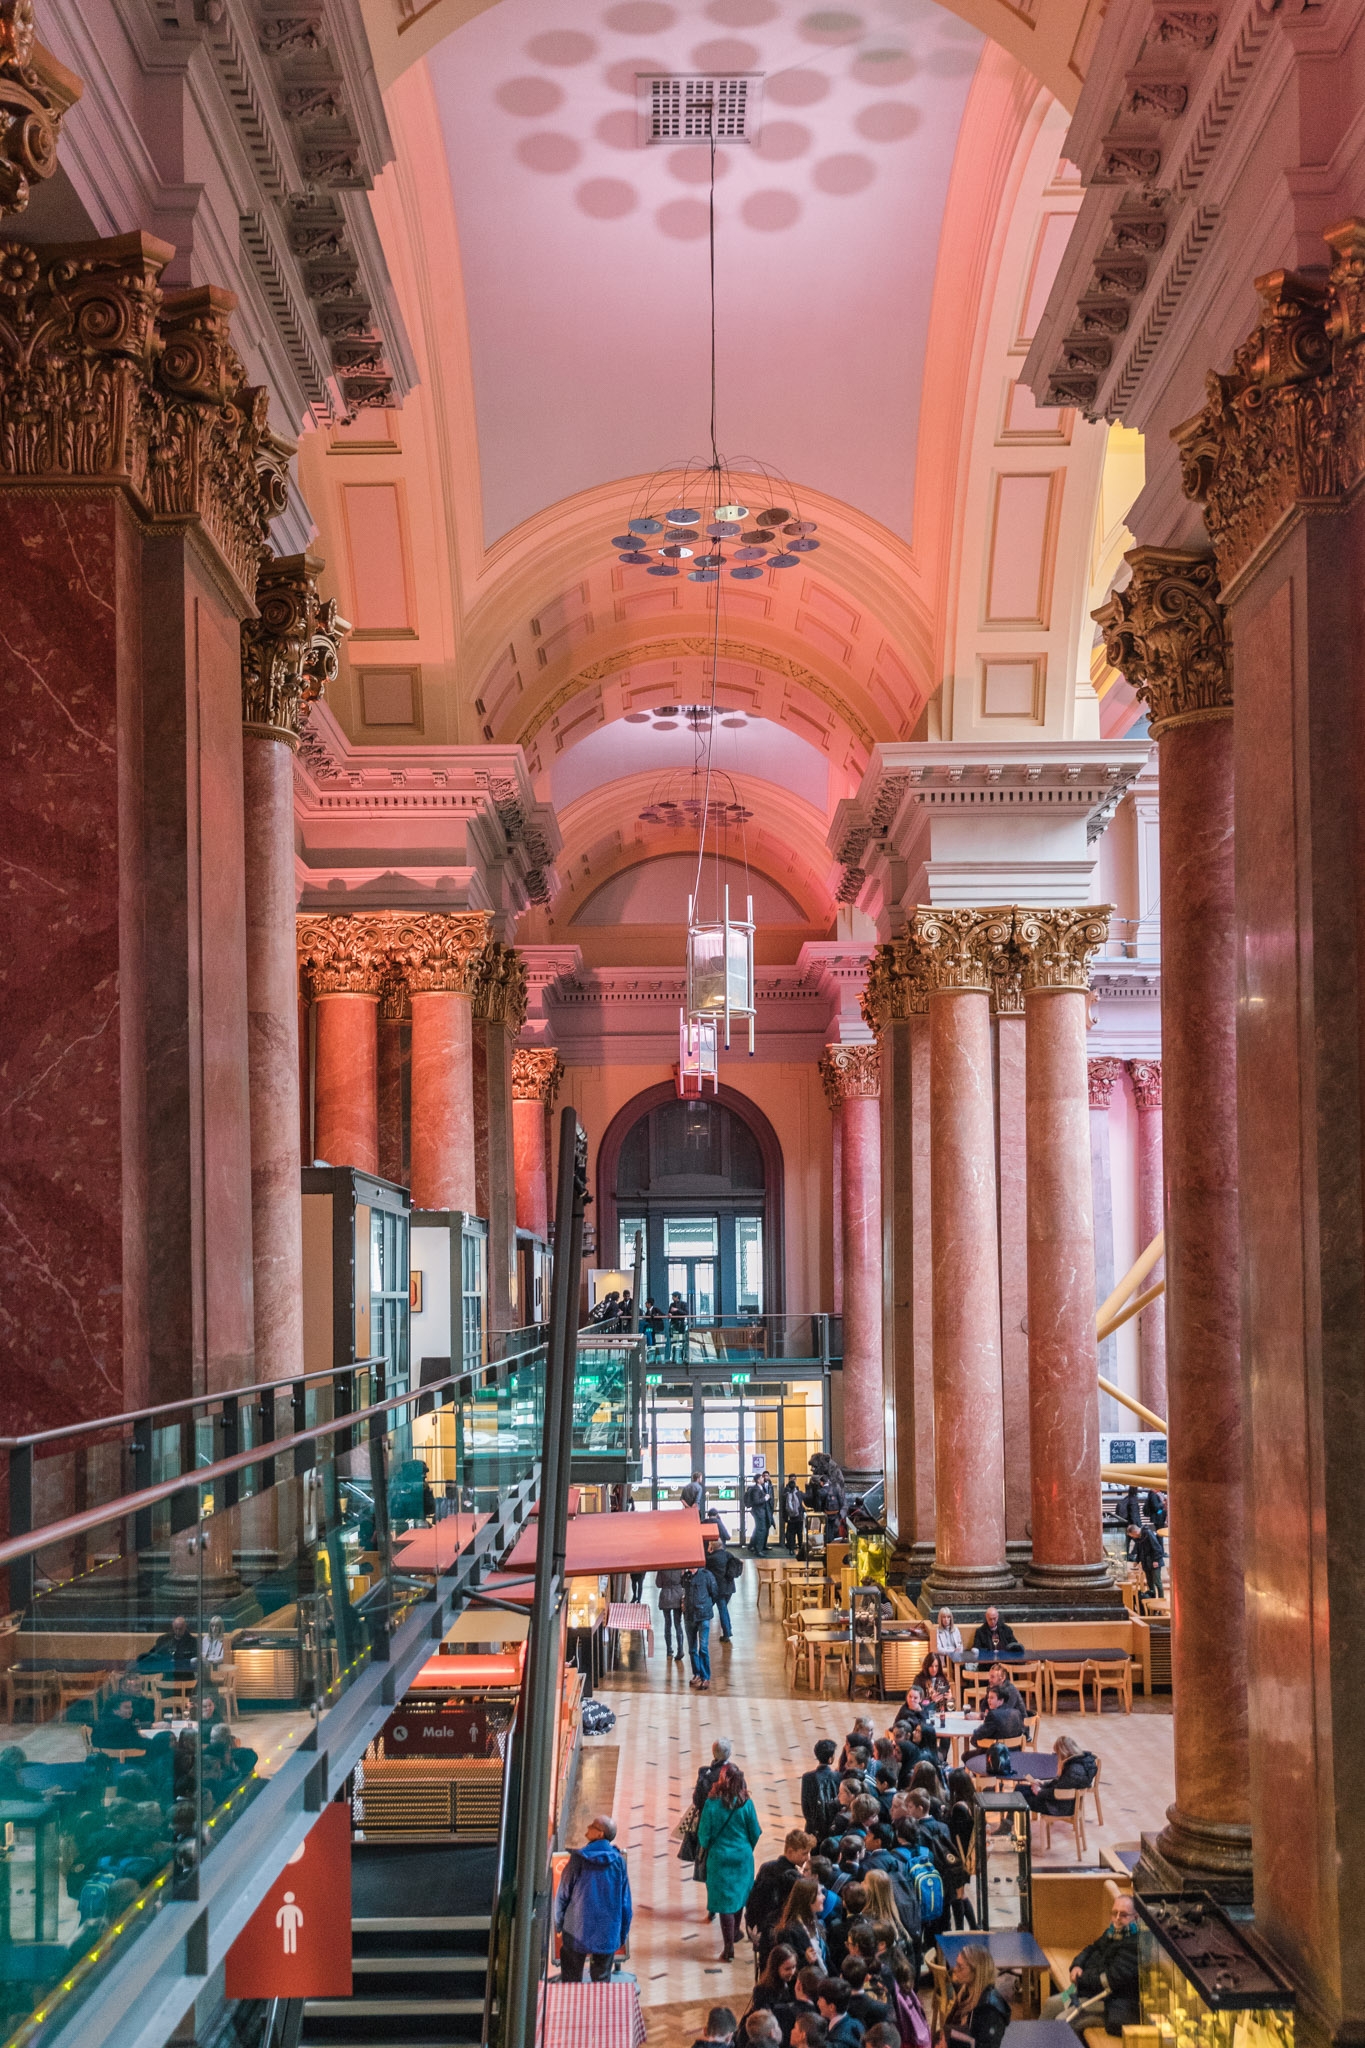 The pink marble of the Royal Exchange Theatre in Manchester // 11 INSTAGRAM-WORTHY PHOTO SPOTS IN MANCHESTER, ENGLAND // www.readysetjetset.net #readysetjetset #manchester #england #uk #unitedkingdom #cityguide #travel